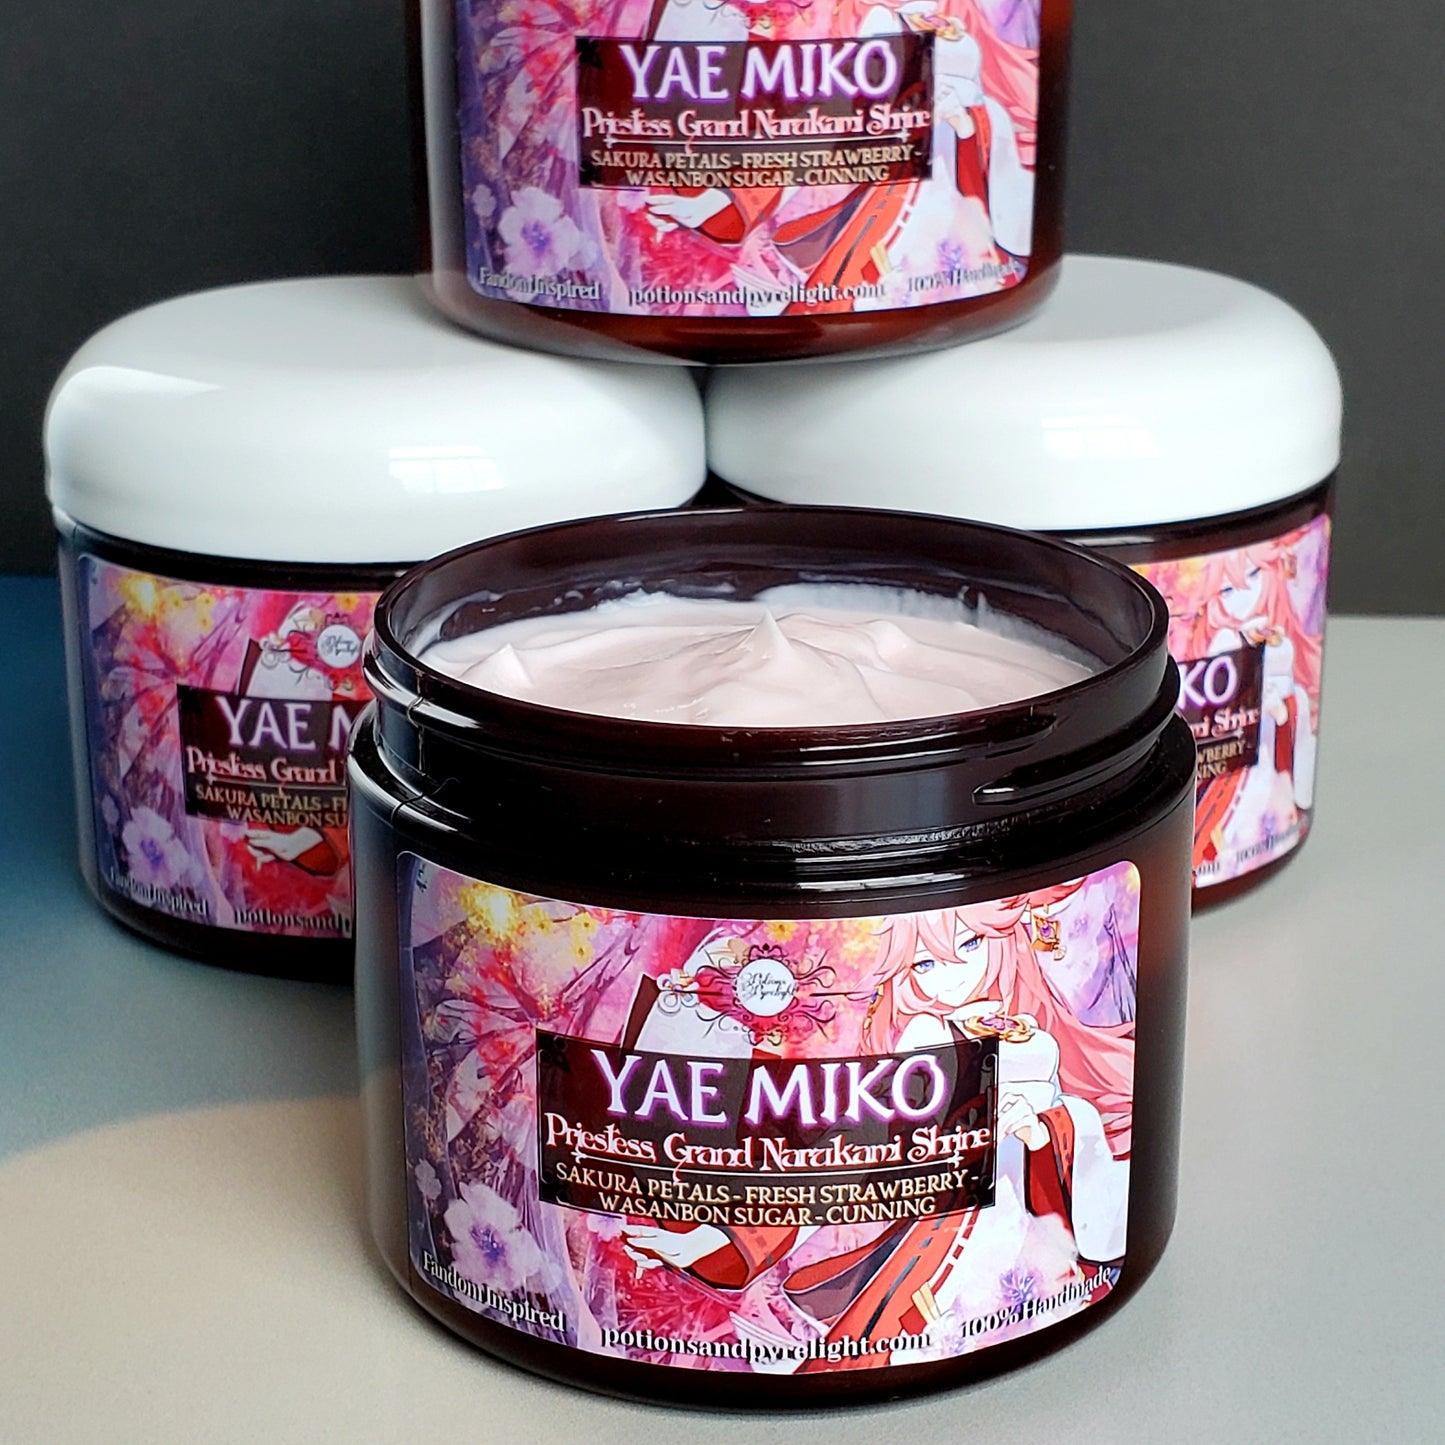 Genshin Impact - Yae Miko Cloud Cream (Winter/Spring Limited Release) - Potions & Pyrelight